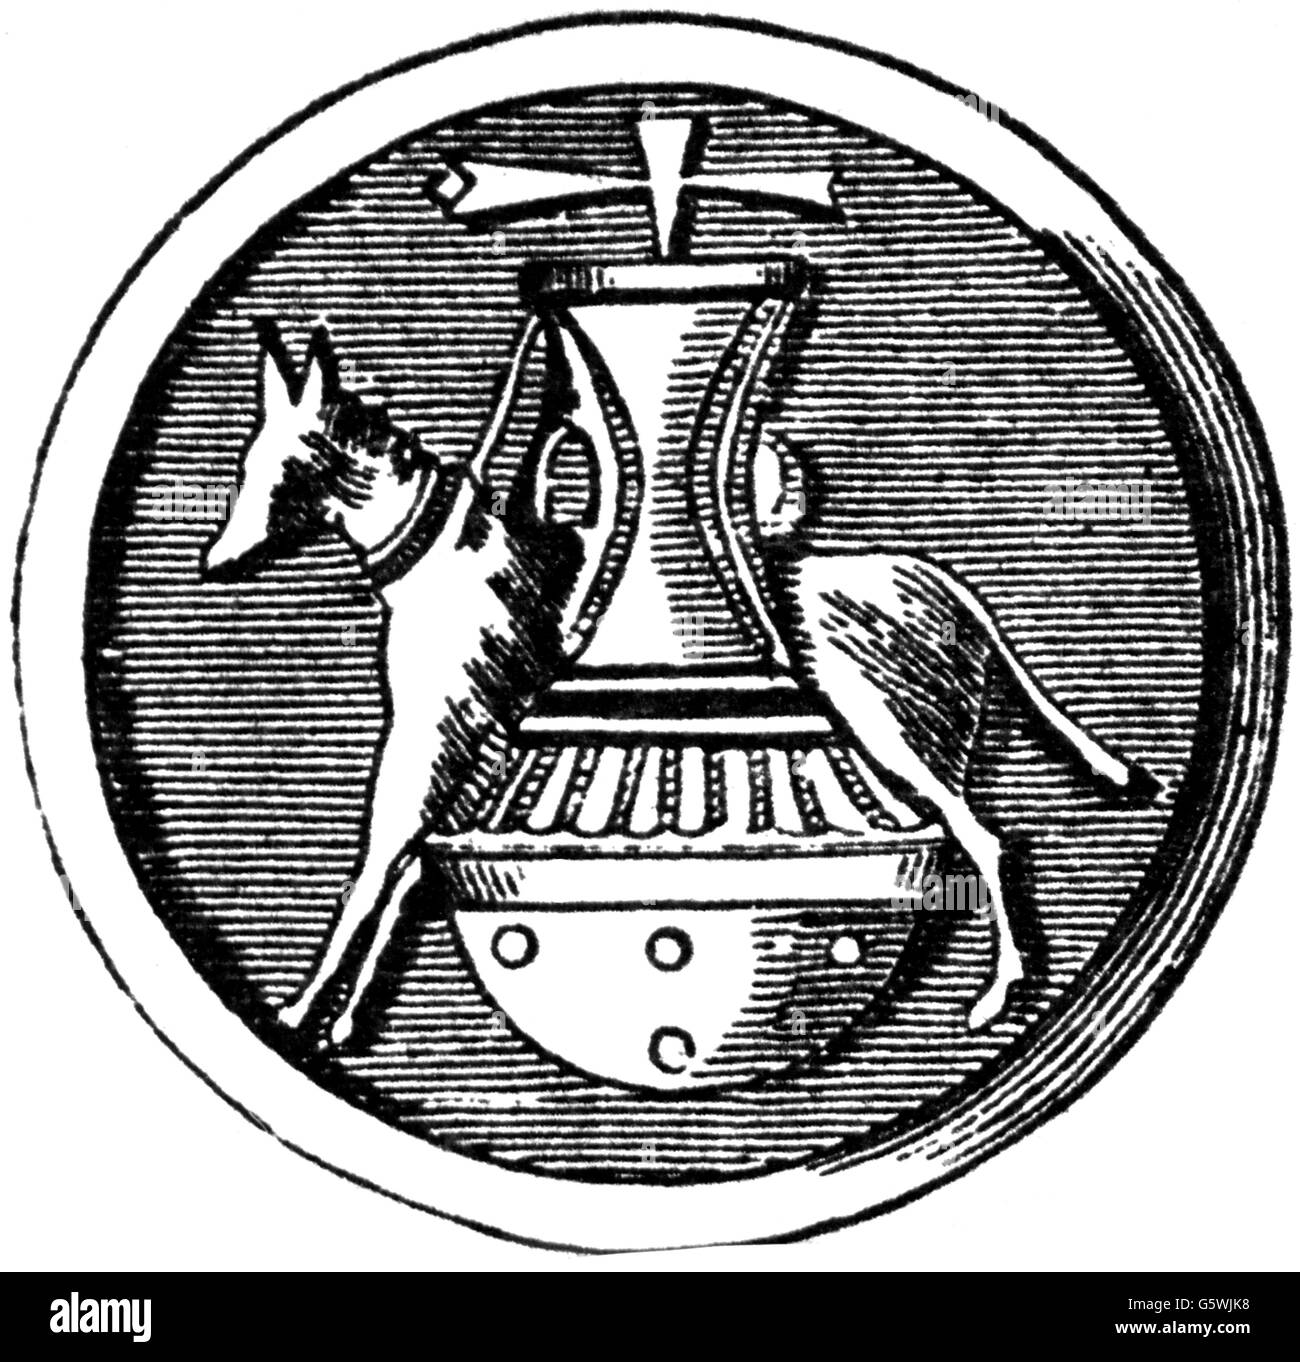 food, flour, rotating mill in a Roman bakery, driven by a donkey, relief, Pompeii, 1st century AD, drawing, 20th century, grind, grind up, grinding, milling, grain, grain mill, gristmill, corn mill, flour mill, grain mills, gristmills, corn mills, flour mills, animals, animal, technics, technology, technologies, Roman, Romans, Roman Empire, ancient world, ancient times, food, foodstuff, mill, mills, bakery, bakeries, driving, drive, donkey, donkeys, historic, historical, ancient world, people, Additional-Rights-Clearences-Not Available Stock Photo